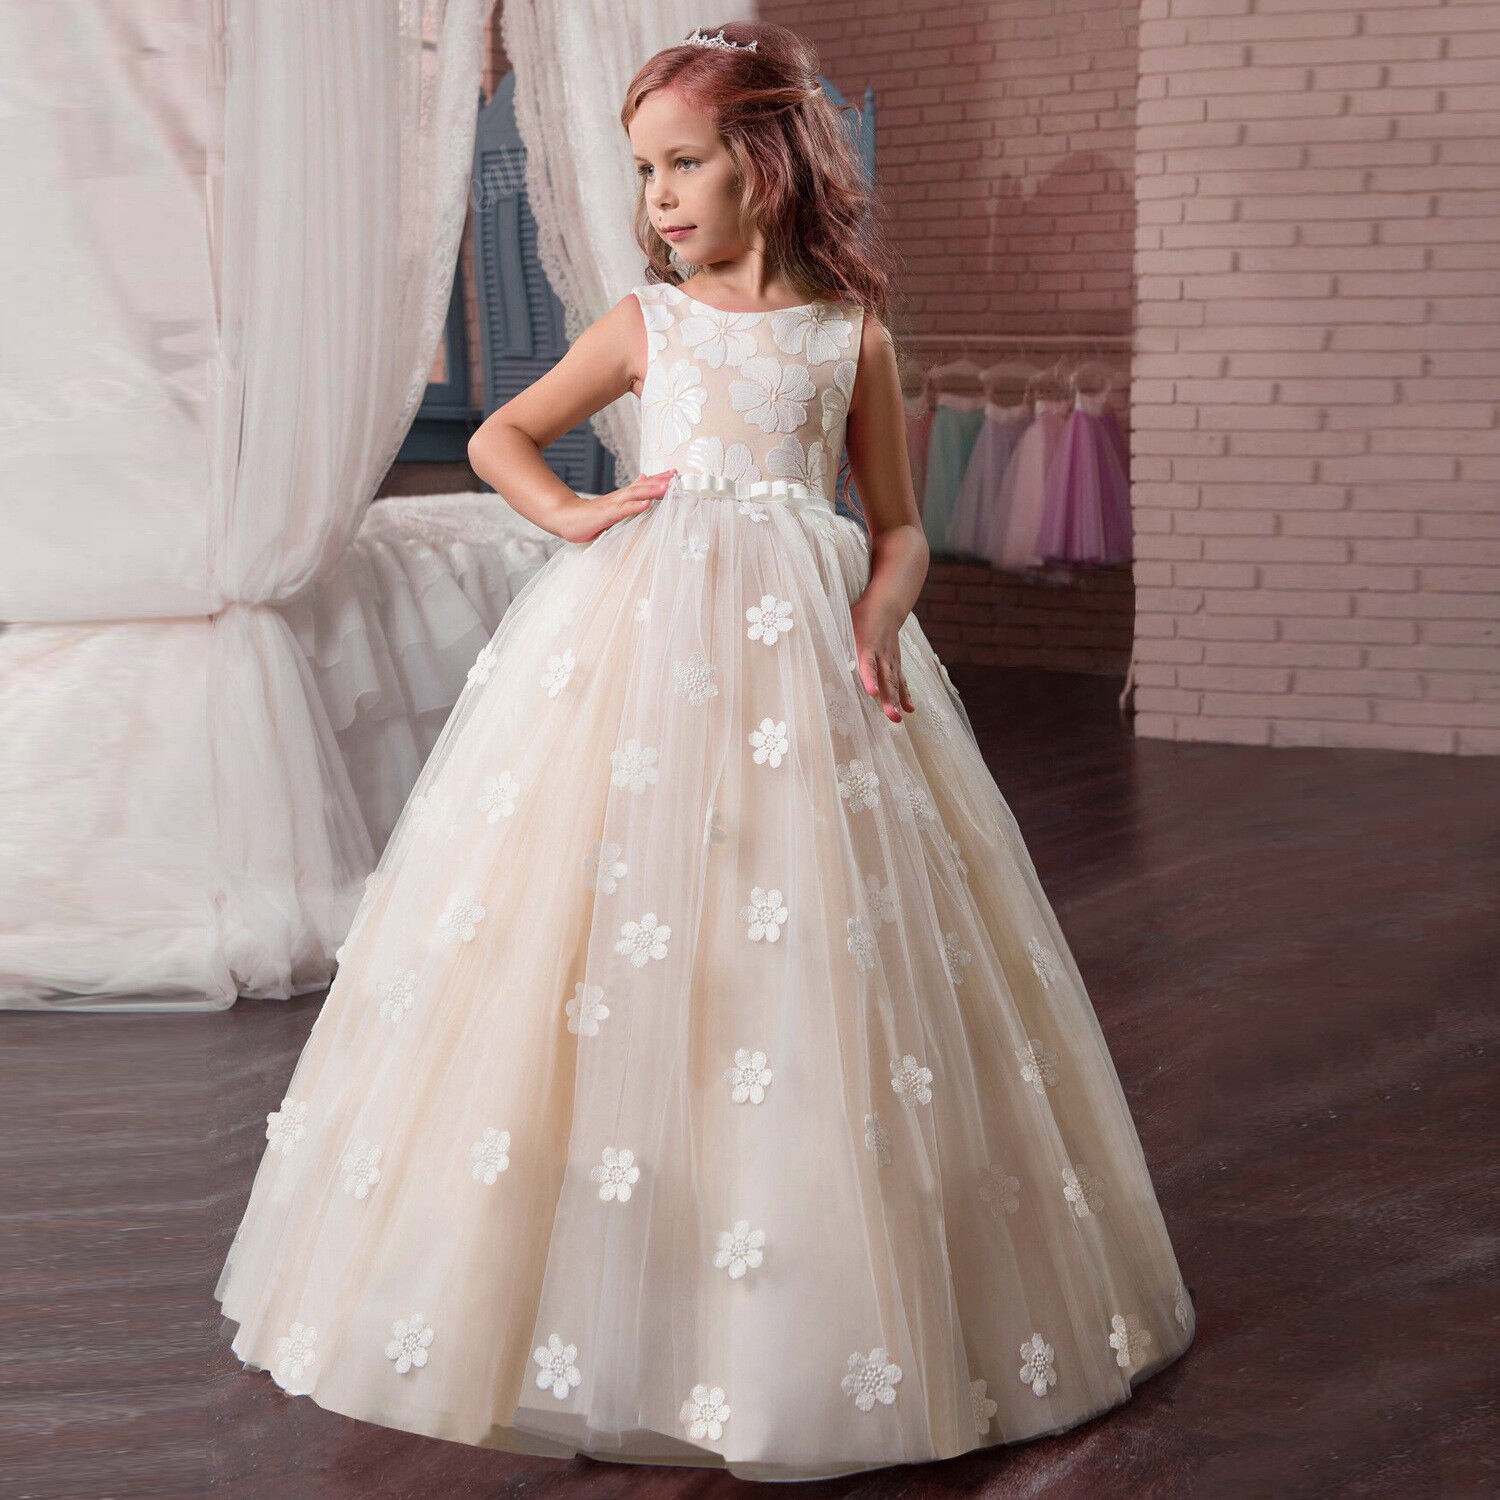 Communion Party Prom Max Direct sale of manufacturer 82% OFF Princess Bridesmaid Flower Girl Dre Wedding